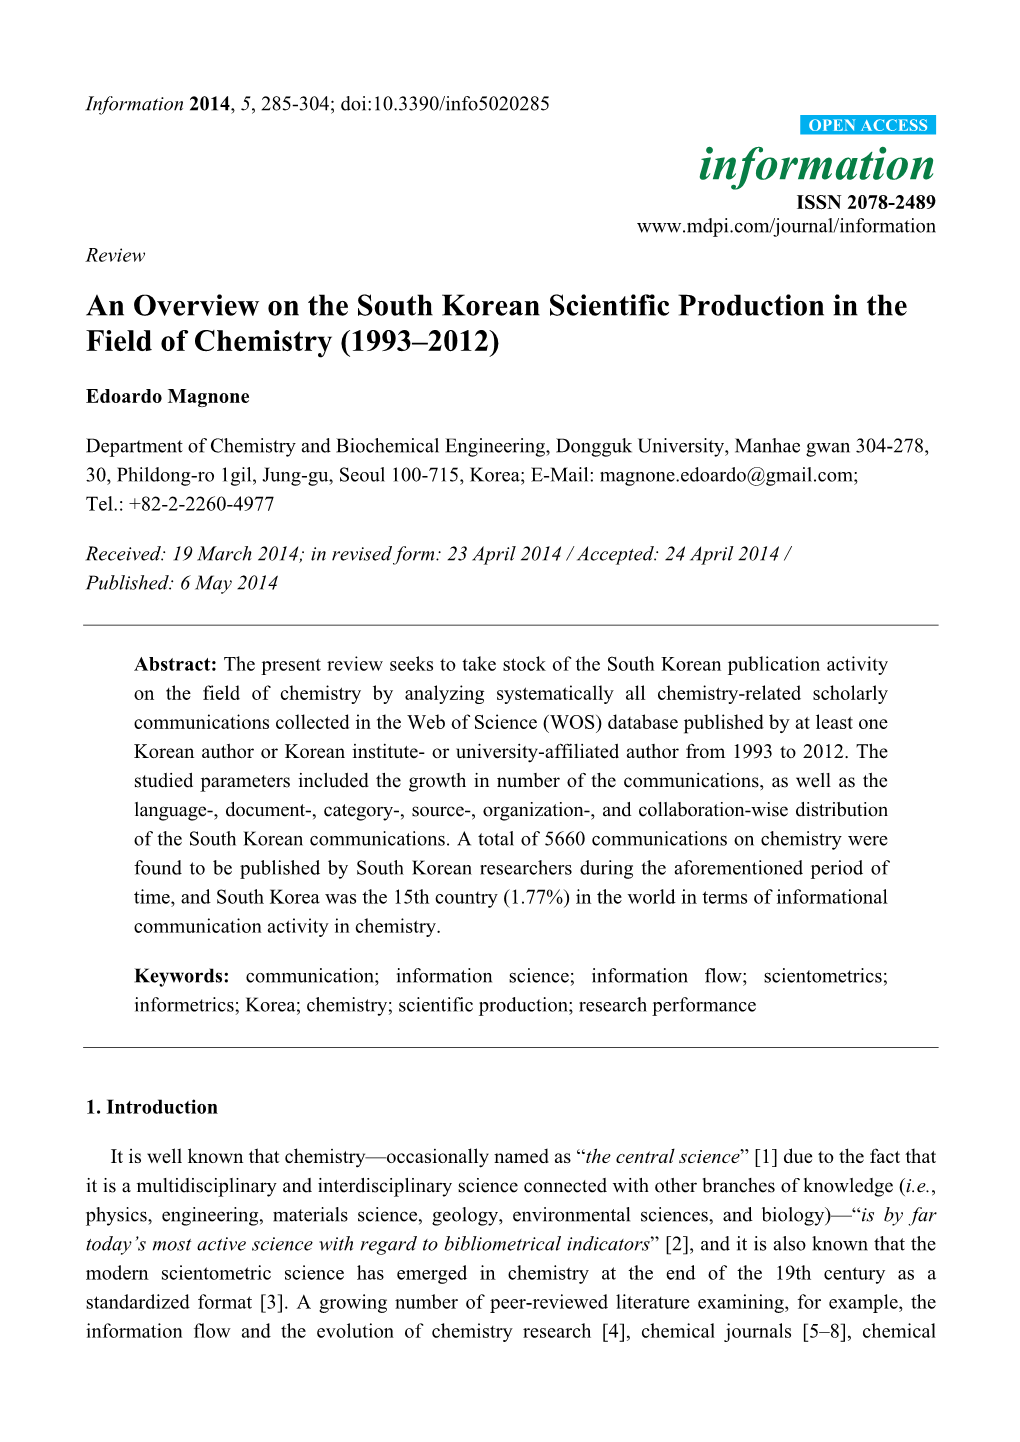 An Overview on the South Korean Scientific Production in the Field of Chemistry (1993–2012)